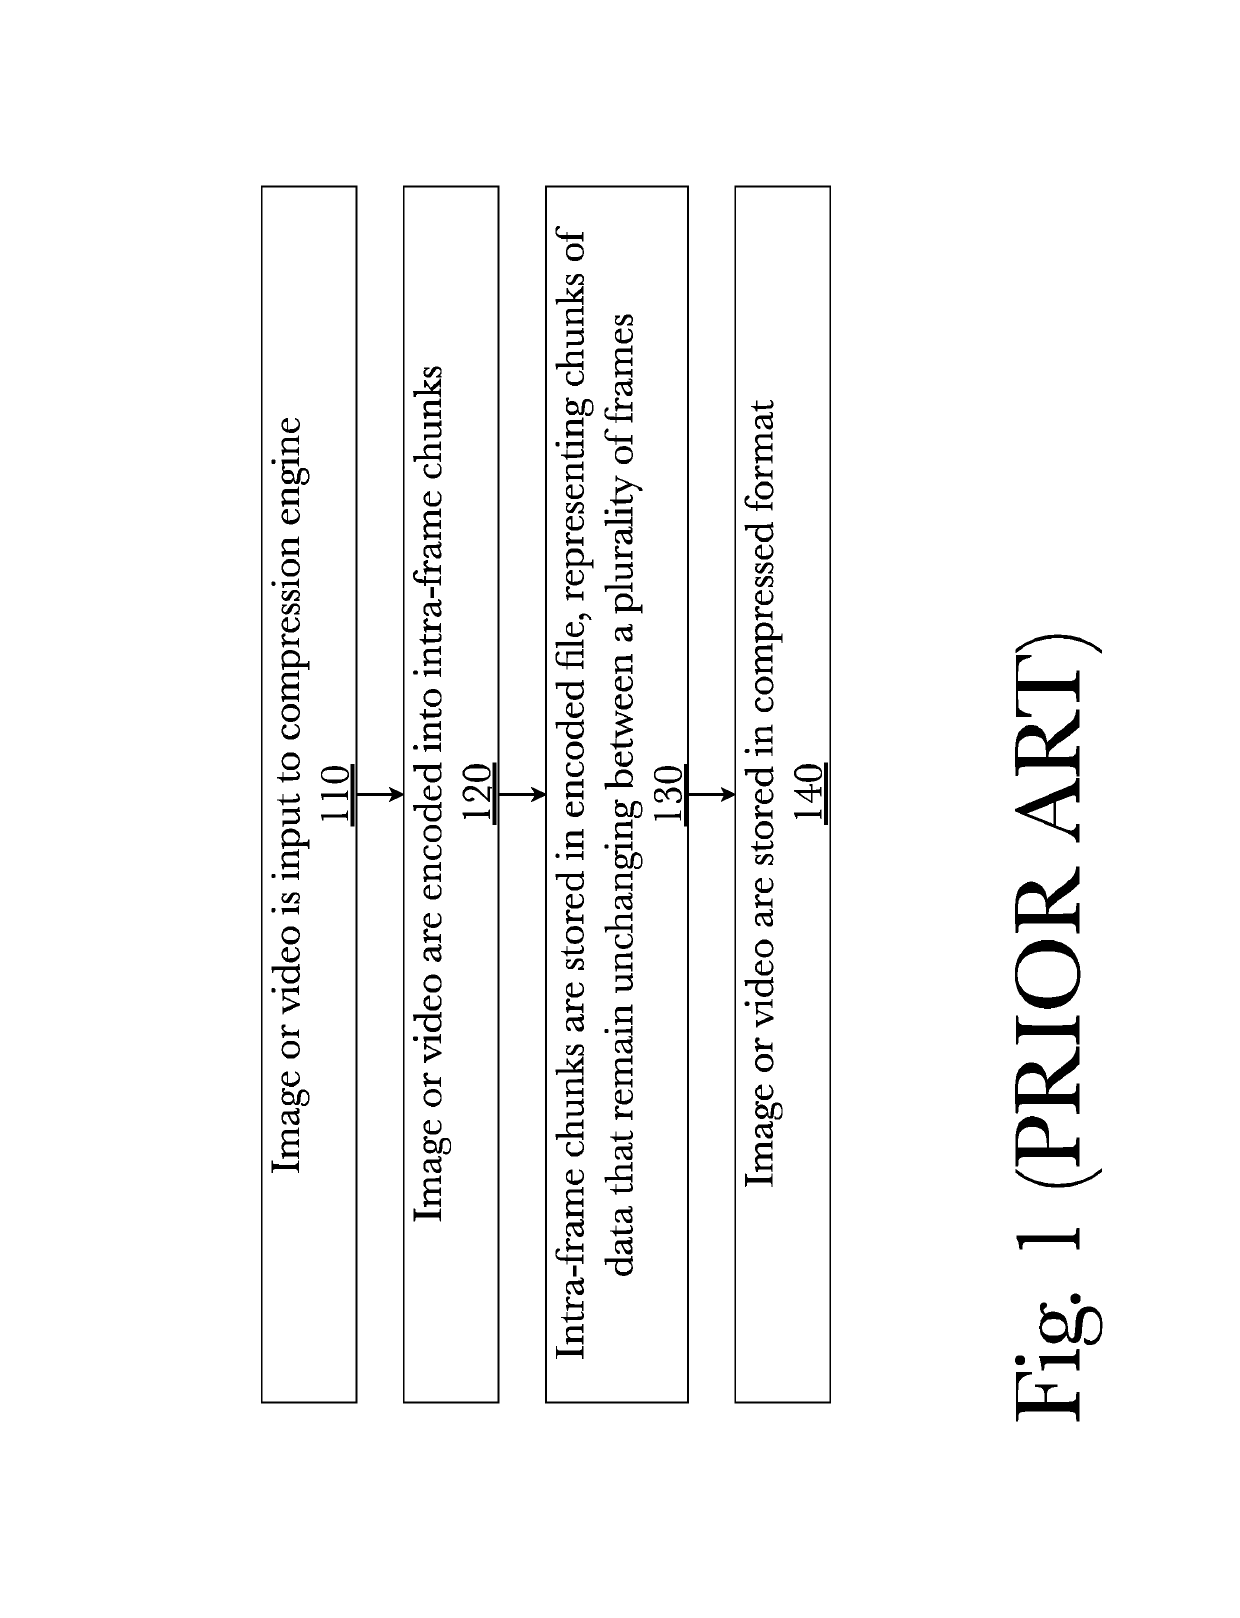 System and method for lossy image and video compression and transmission utilizing neural networks